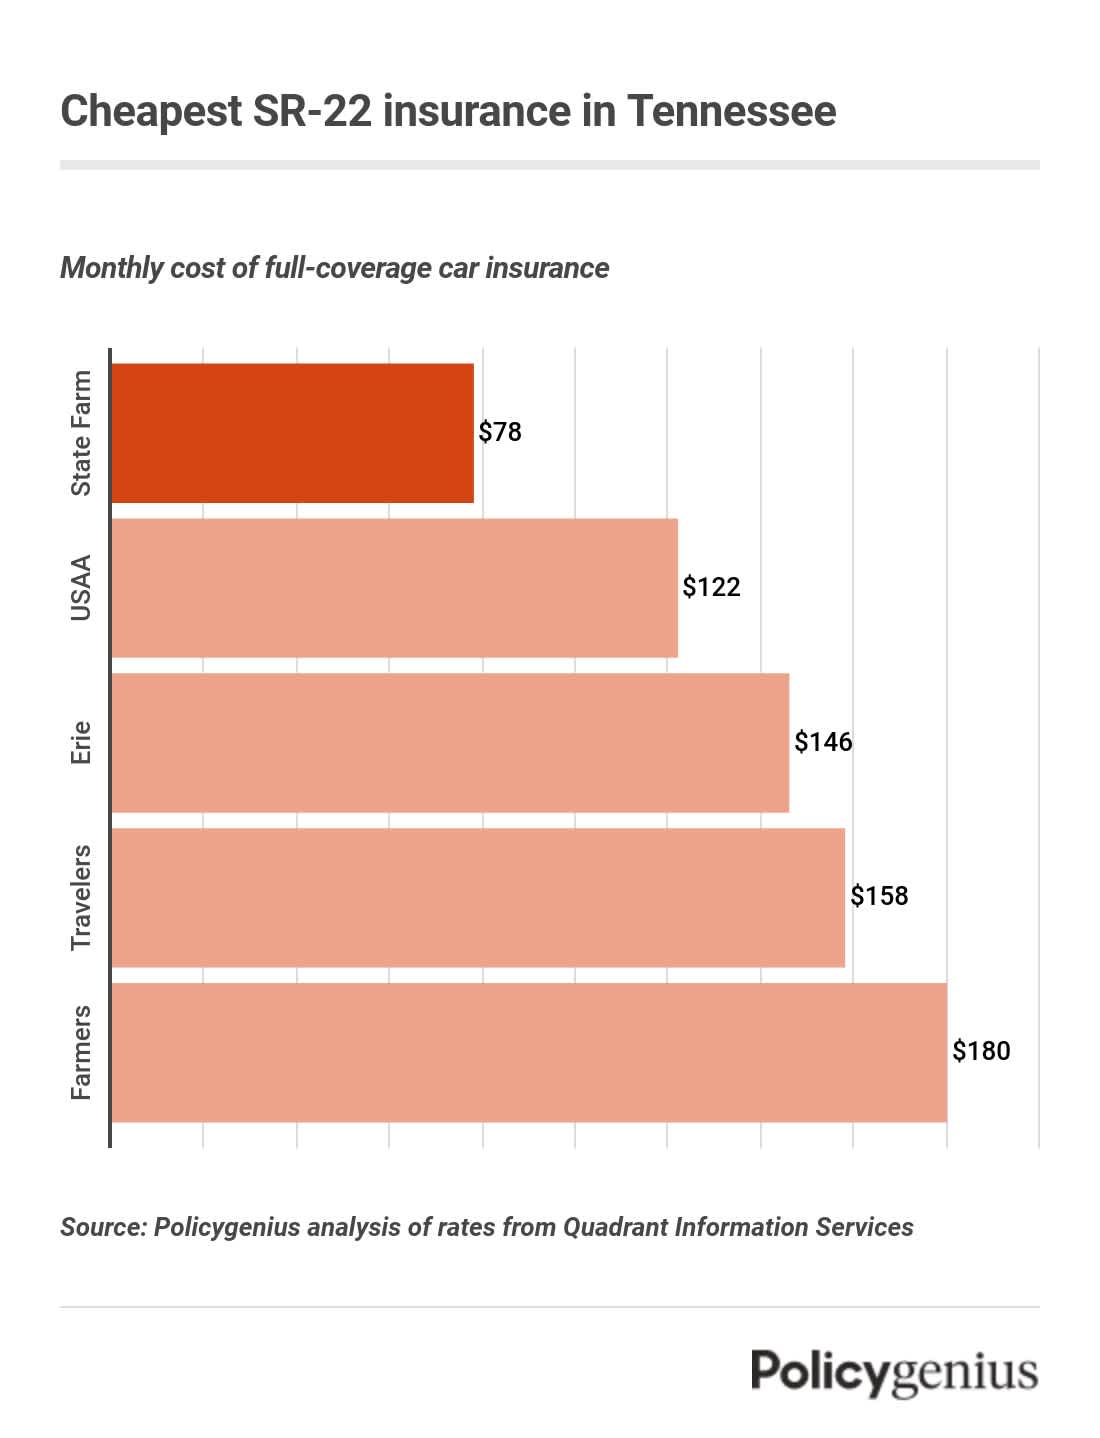 A bar graph showing the cheapest auto insurance in Tennessee for drivers with an SR-22 on their records.